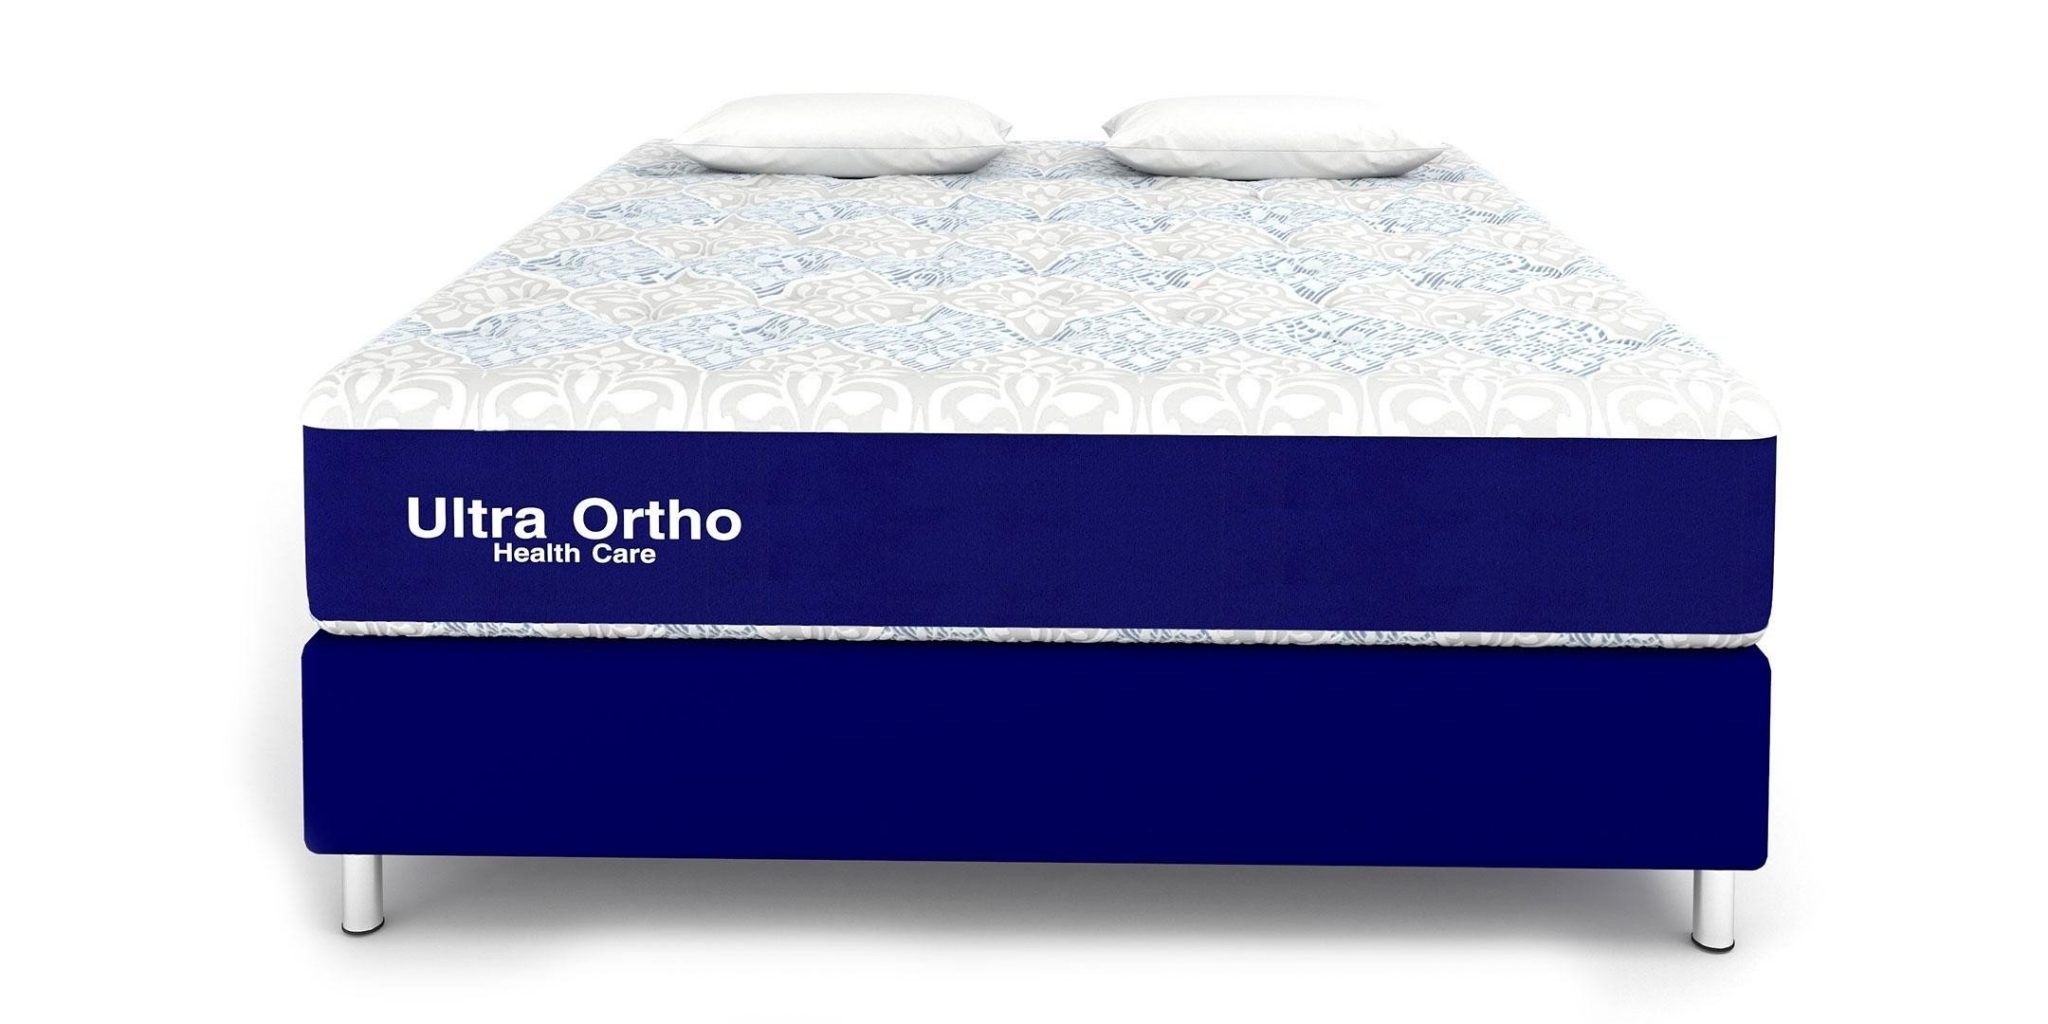 sulfex excelsior ortho mattress price